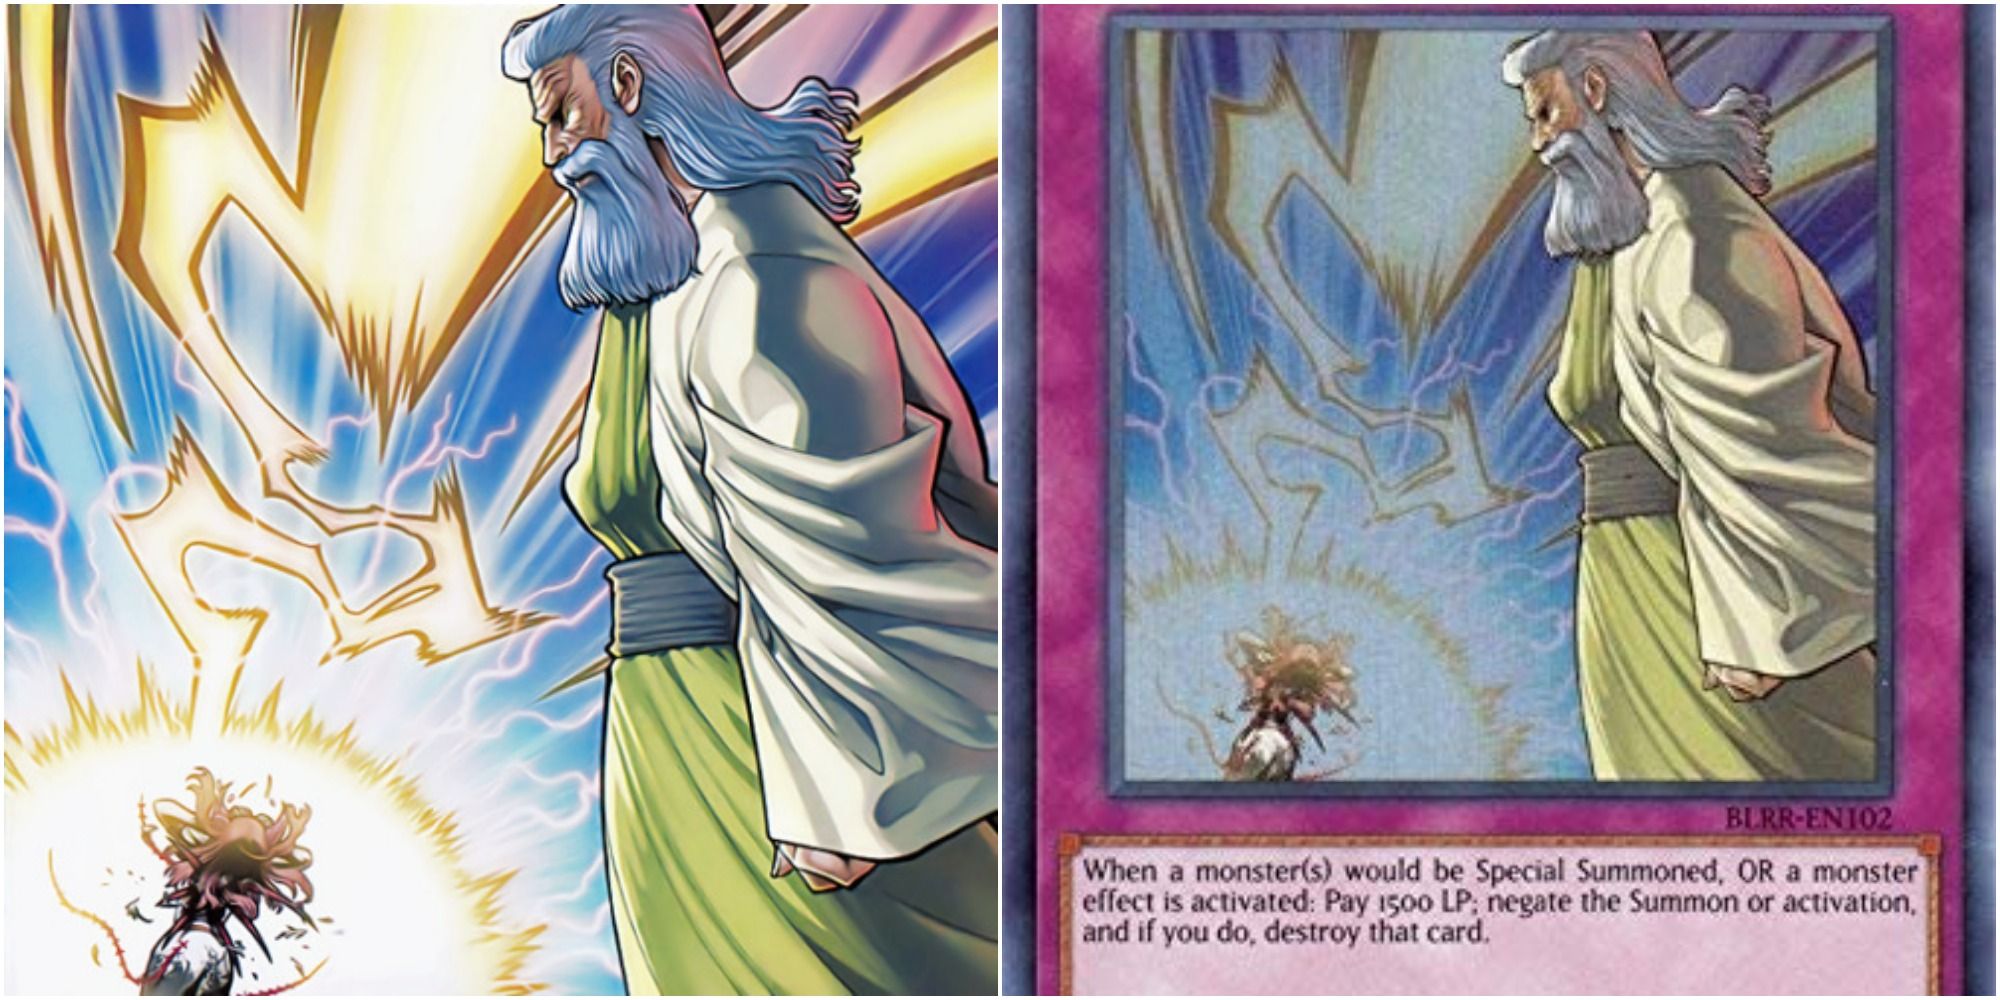 yugioh solemn strike card art and text